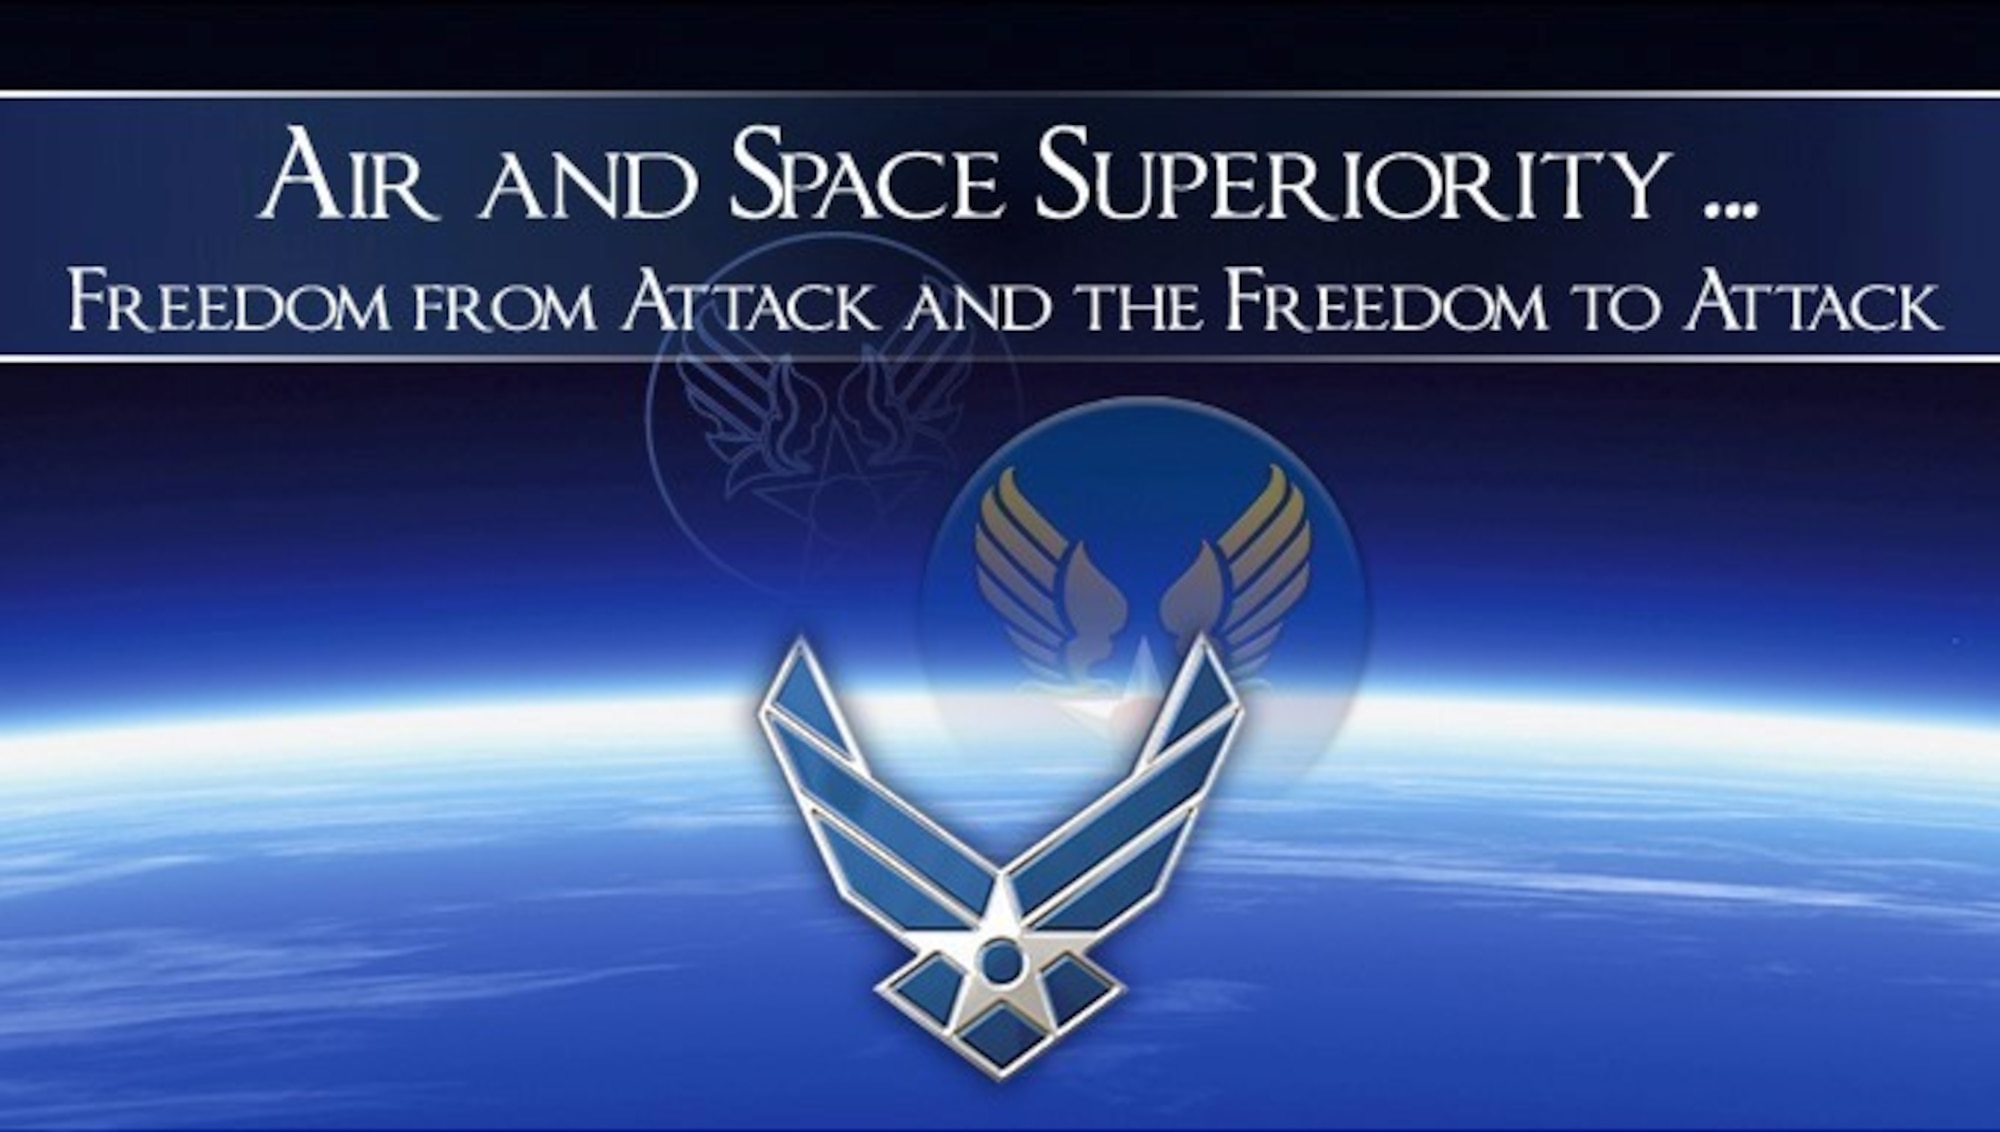 U.S. Air Force: Is superiority under threat?